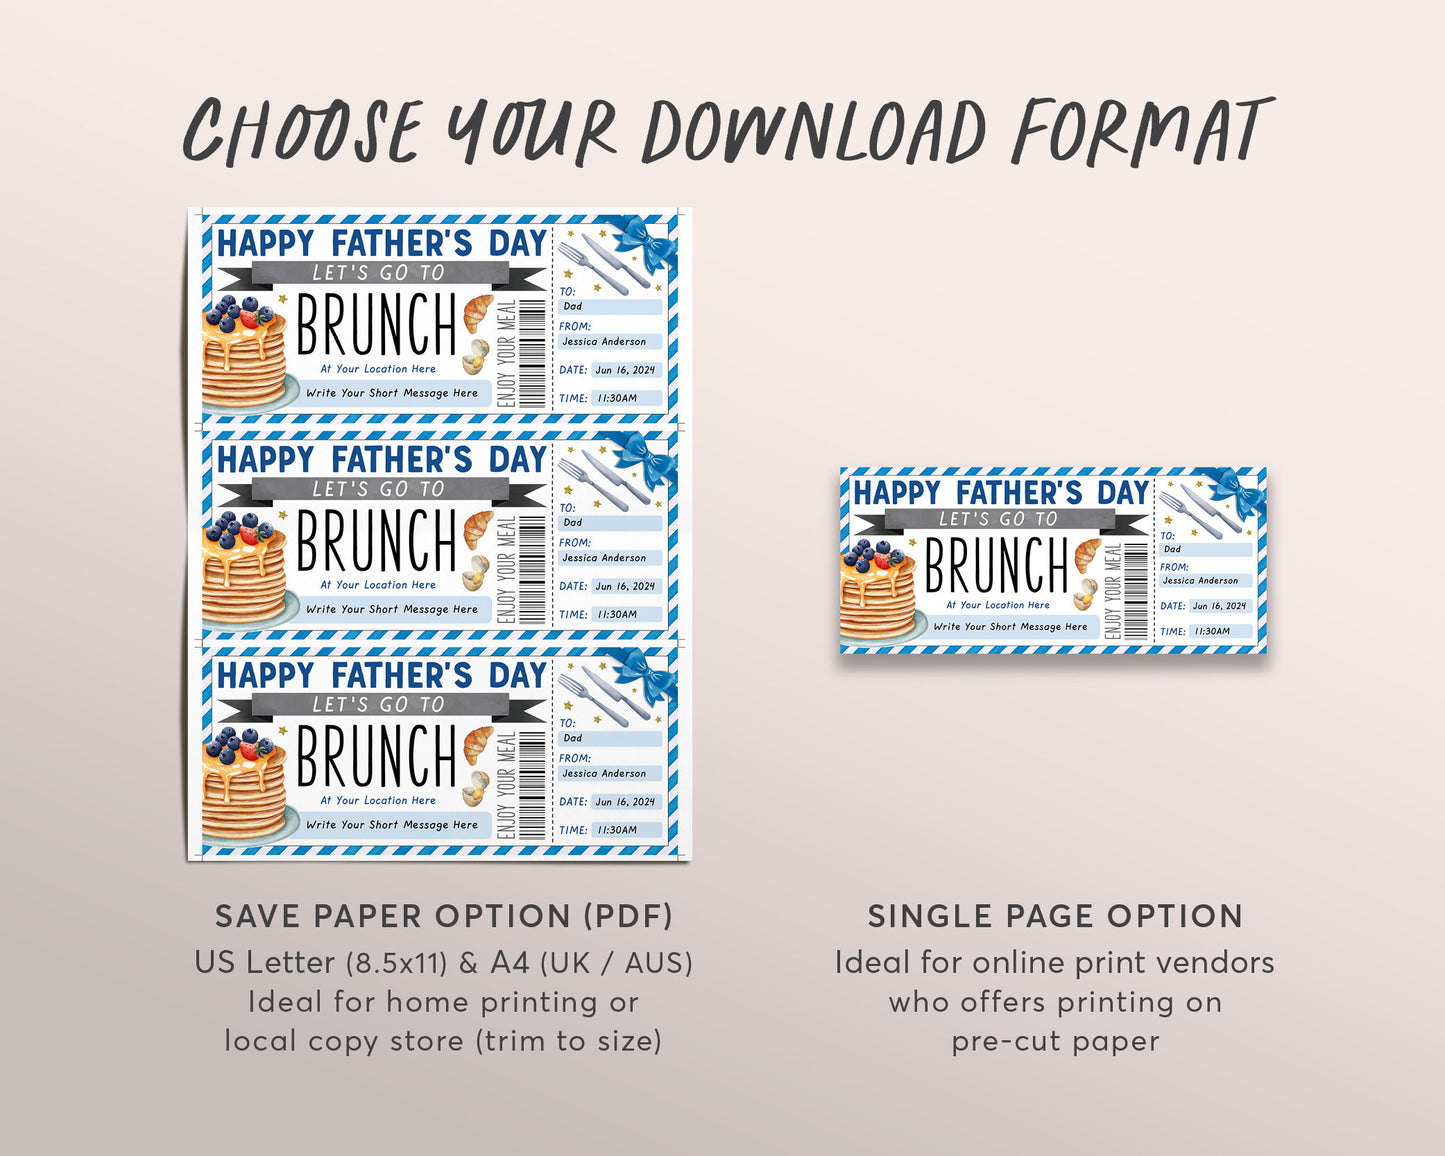 Fathers Day Brunch Coupon Ticket Editable Template, Fathers Day Lunch Luncheon Gift Certificate For Dad, Breakfast Gift Voucher Printable